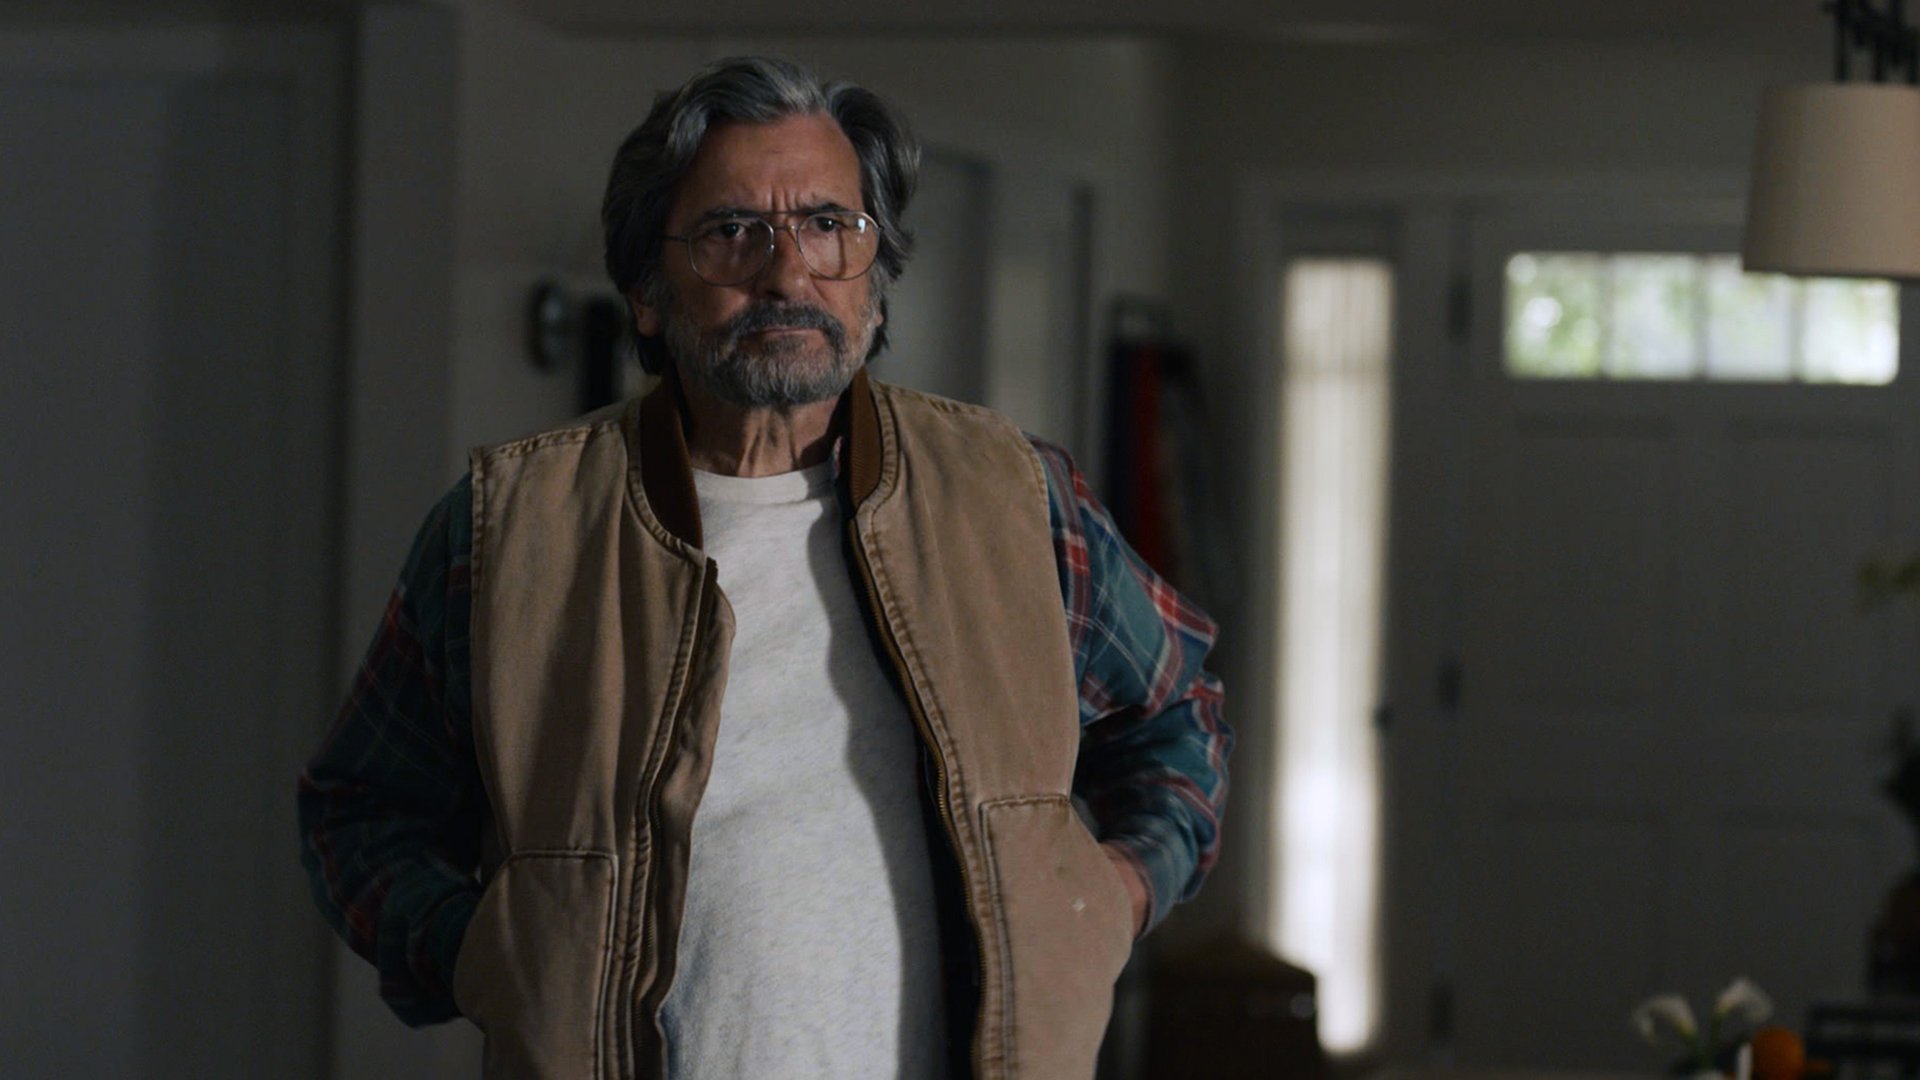 Griffin Dunne as Nicky at Kevin and Madison’s house in ‘This Is Us’ Season 5 Episode 14